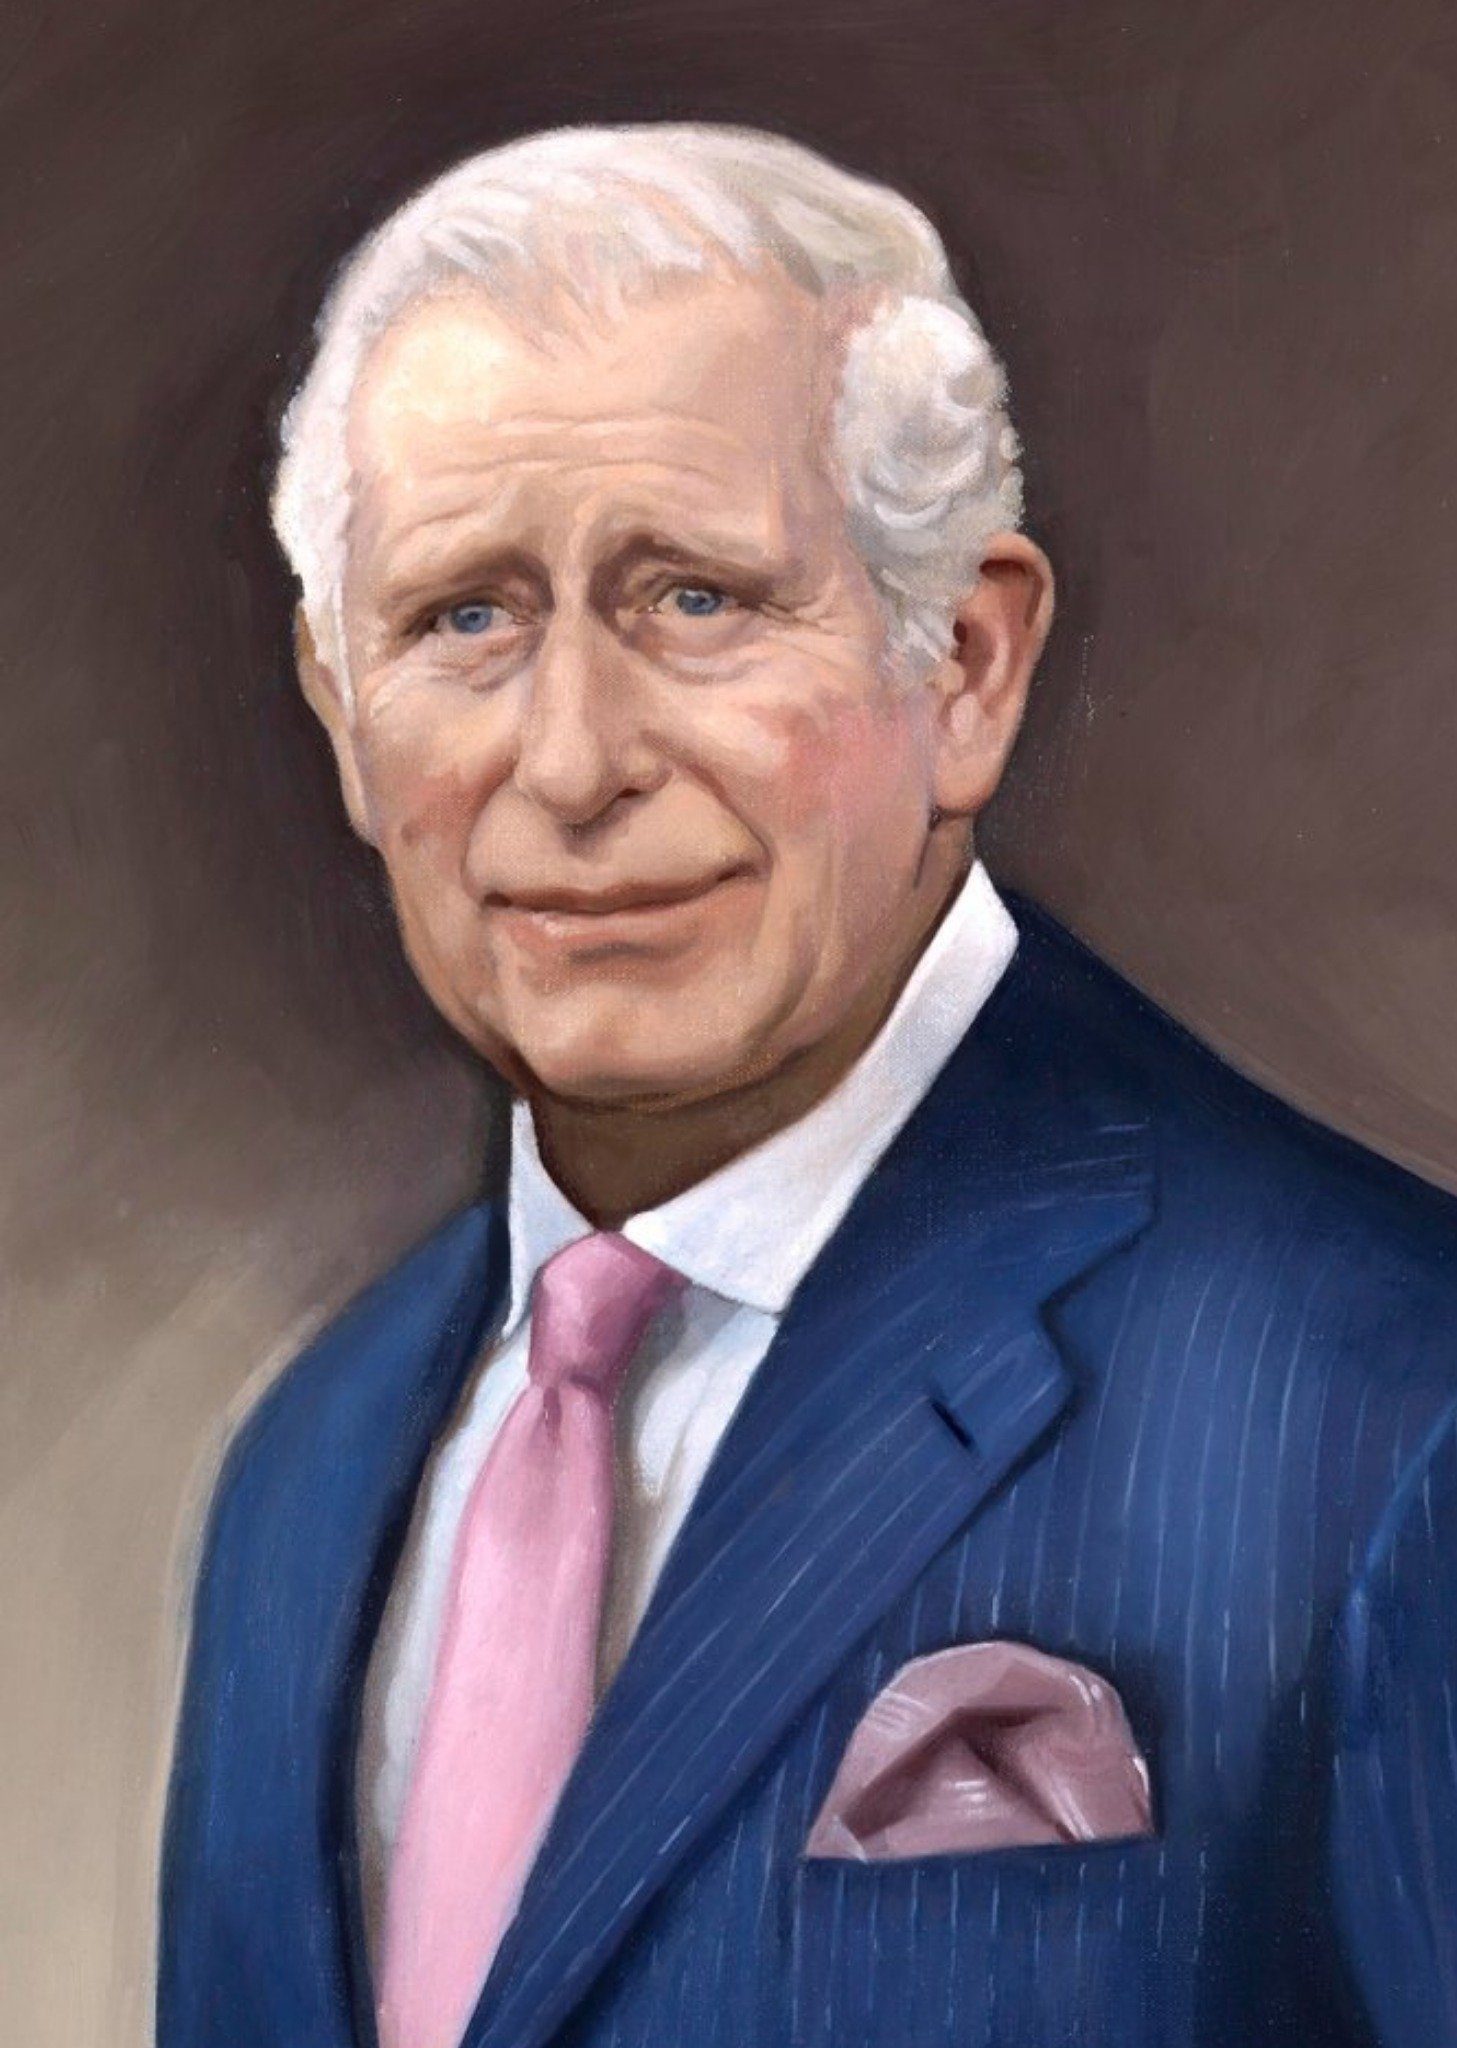 Moonpig King Charles Iii Traditional Portrait Coronation Card By Mary Evans Picture Library Ecard